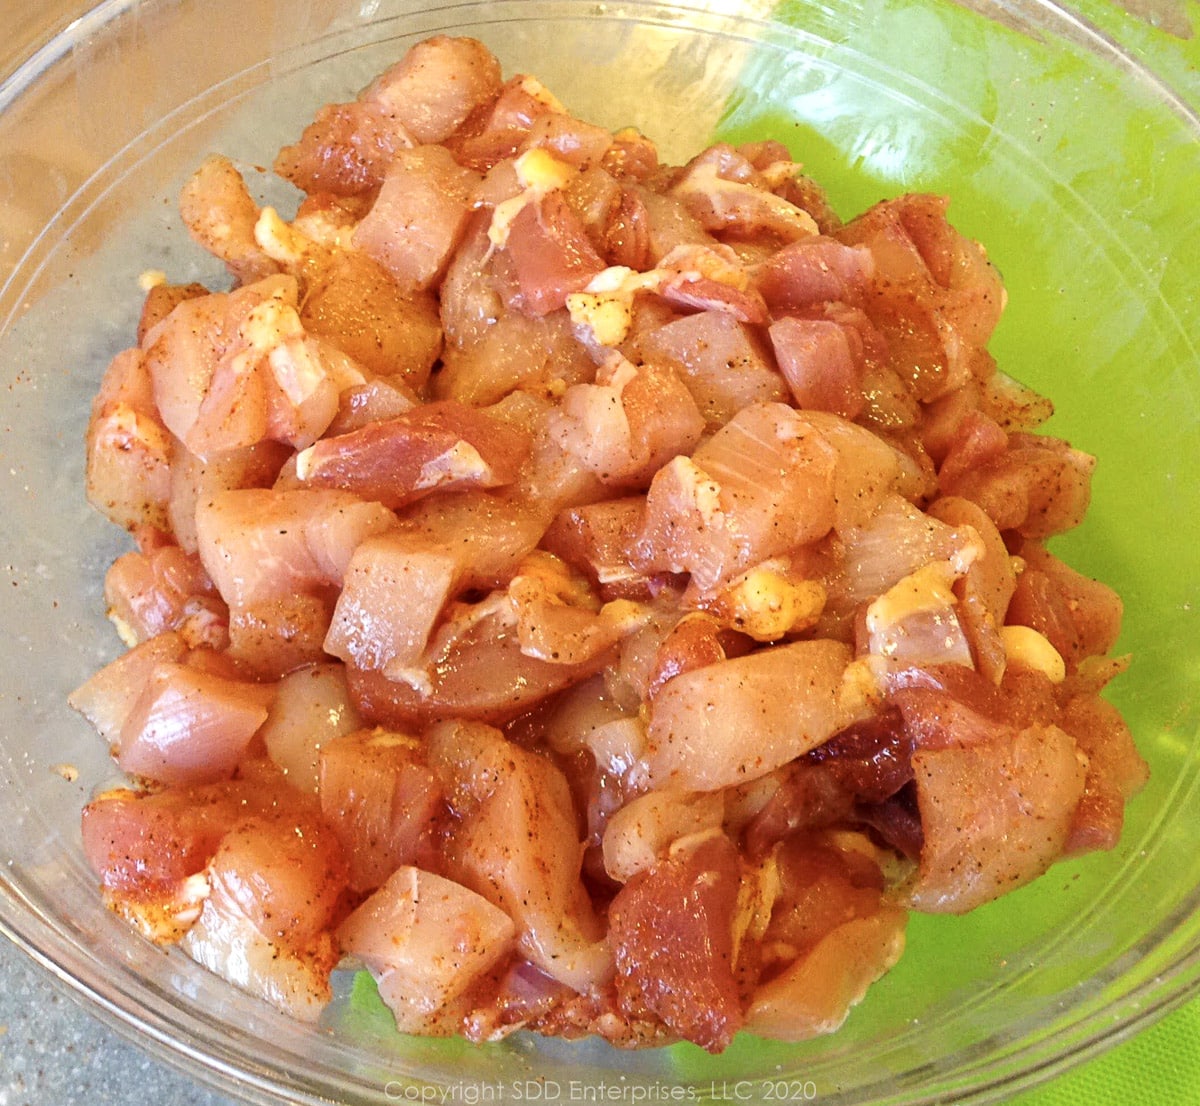 seasoned cut up uncooked chicken in a glass bowl